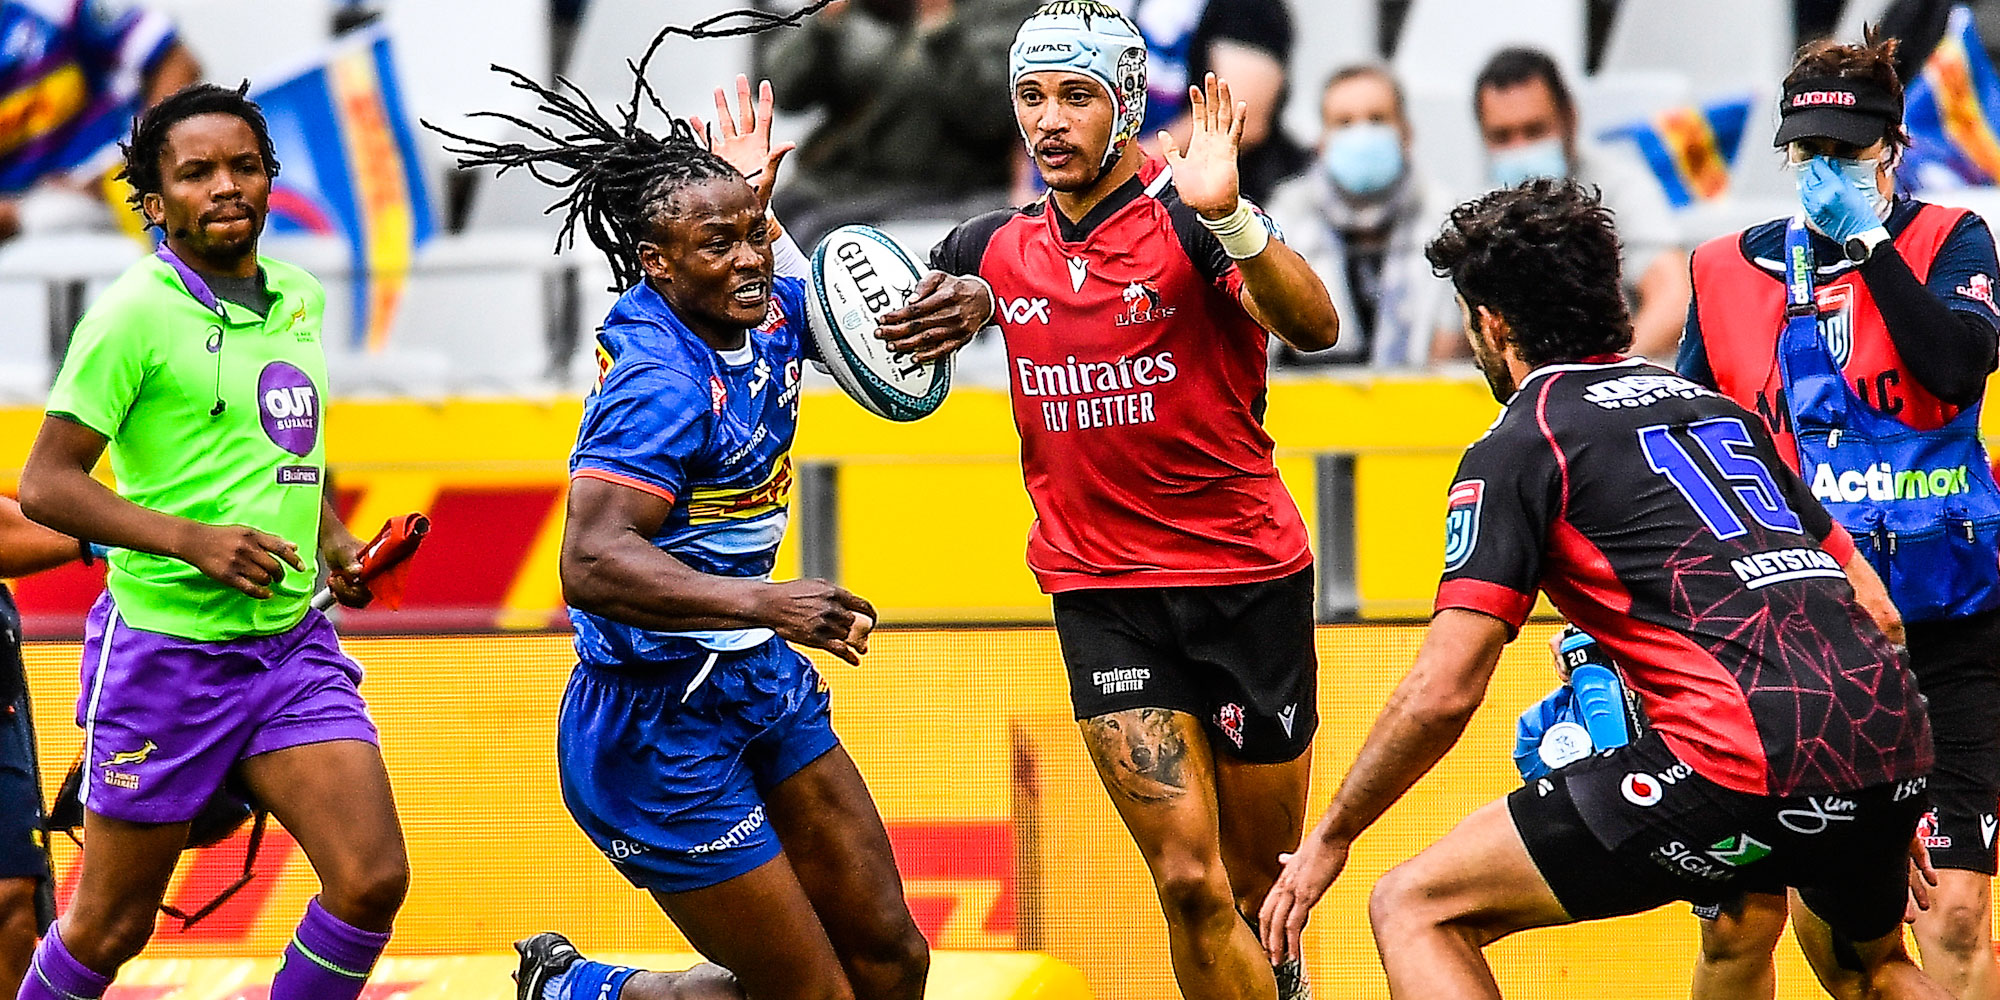 Seabelo Senatla has been in sensational form for the DHL Stormers.